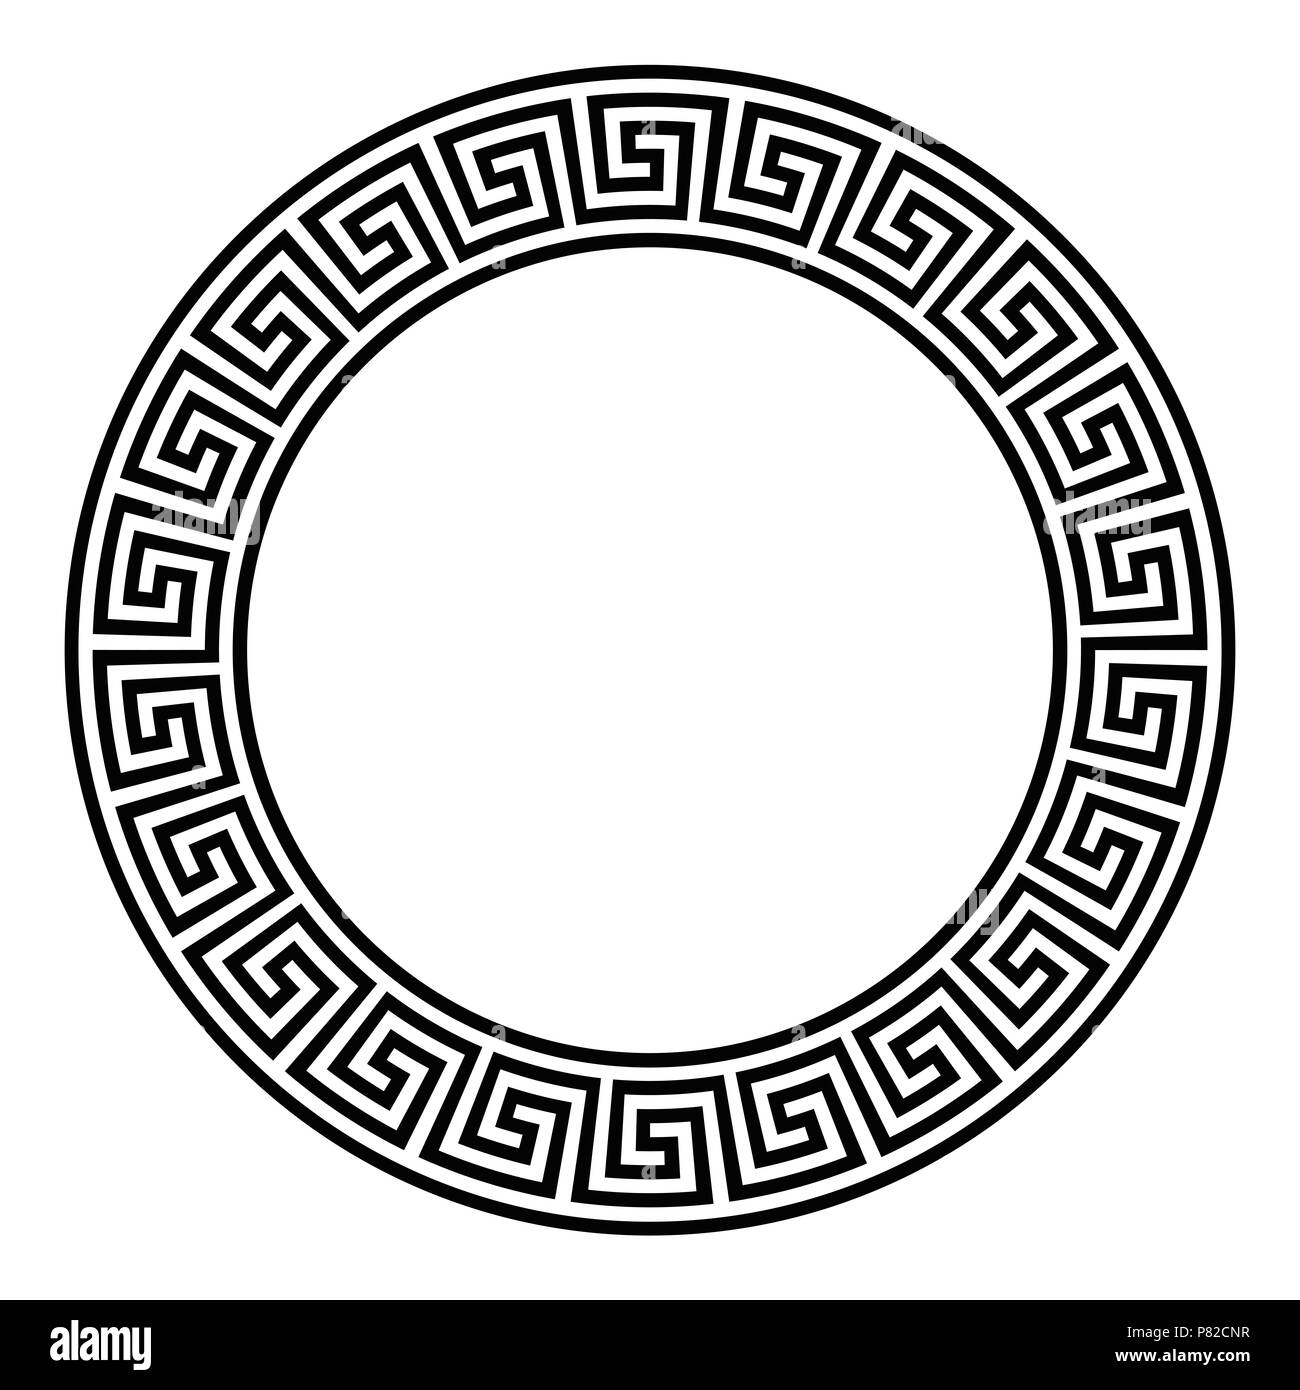 Circle frame with seamless meander pattern. Meandros, a decorative border, constructed from continuous lines, shaped into a repeated motif. Greek fret Stock Photo